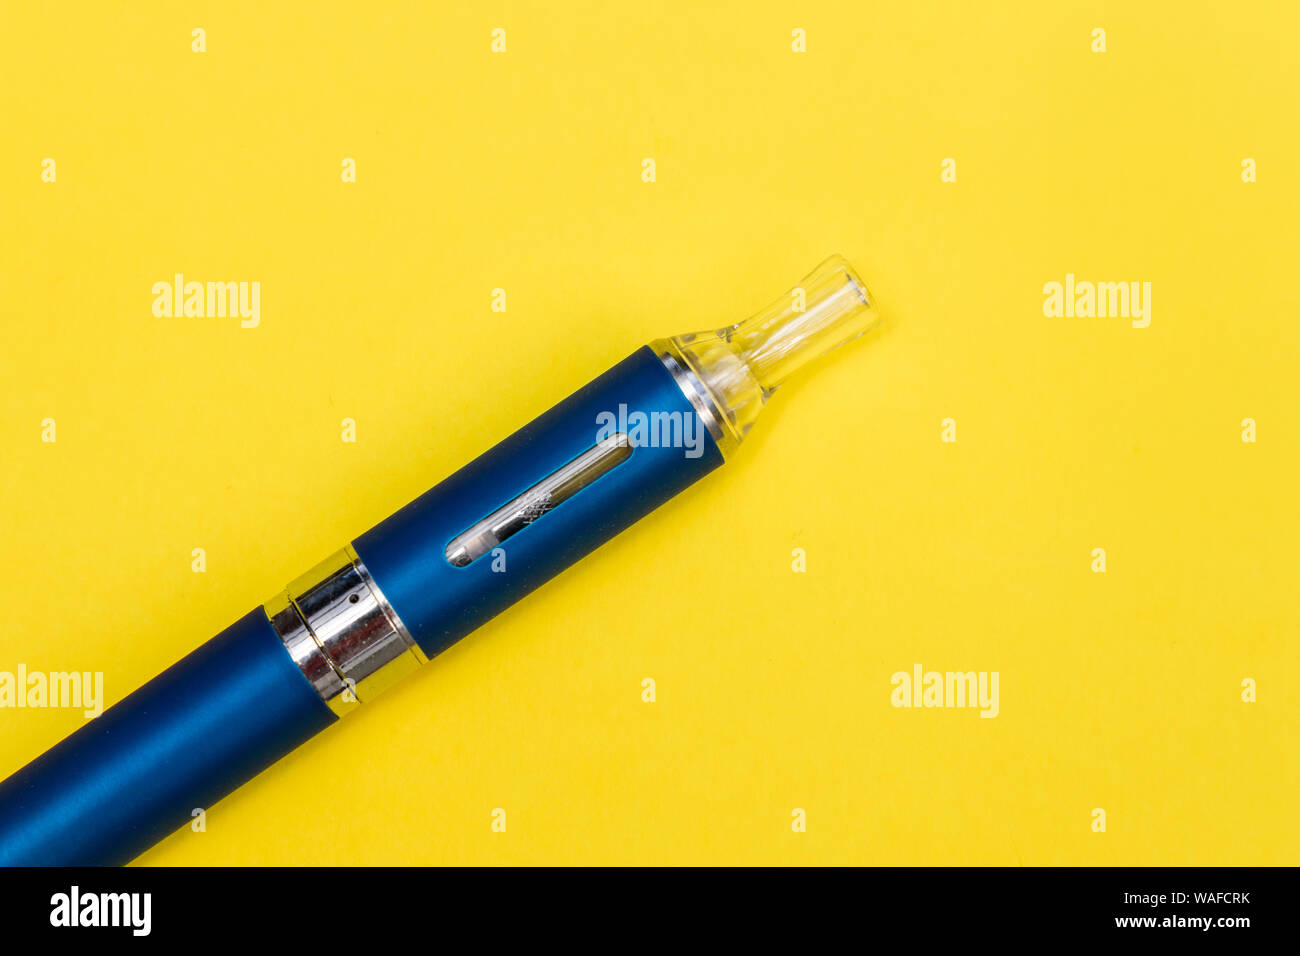 Vape pen metal electronic cigarette with vaping yellow background Stock Photo